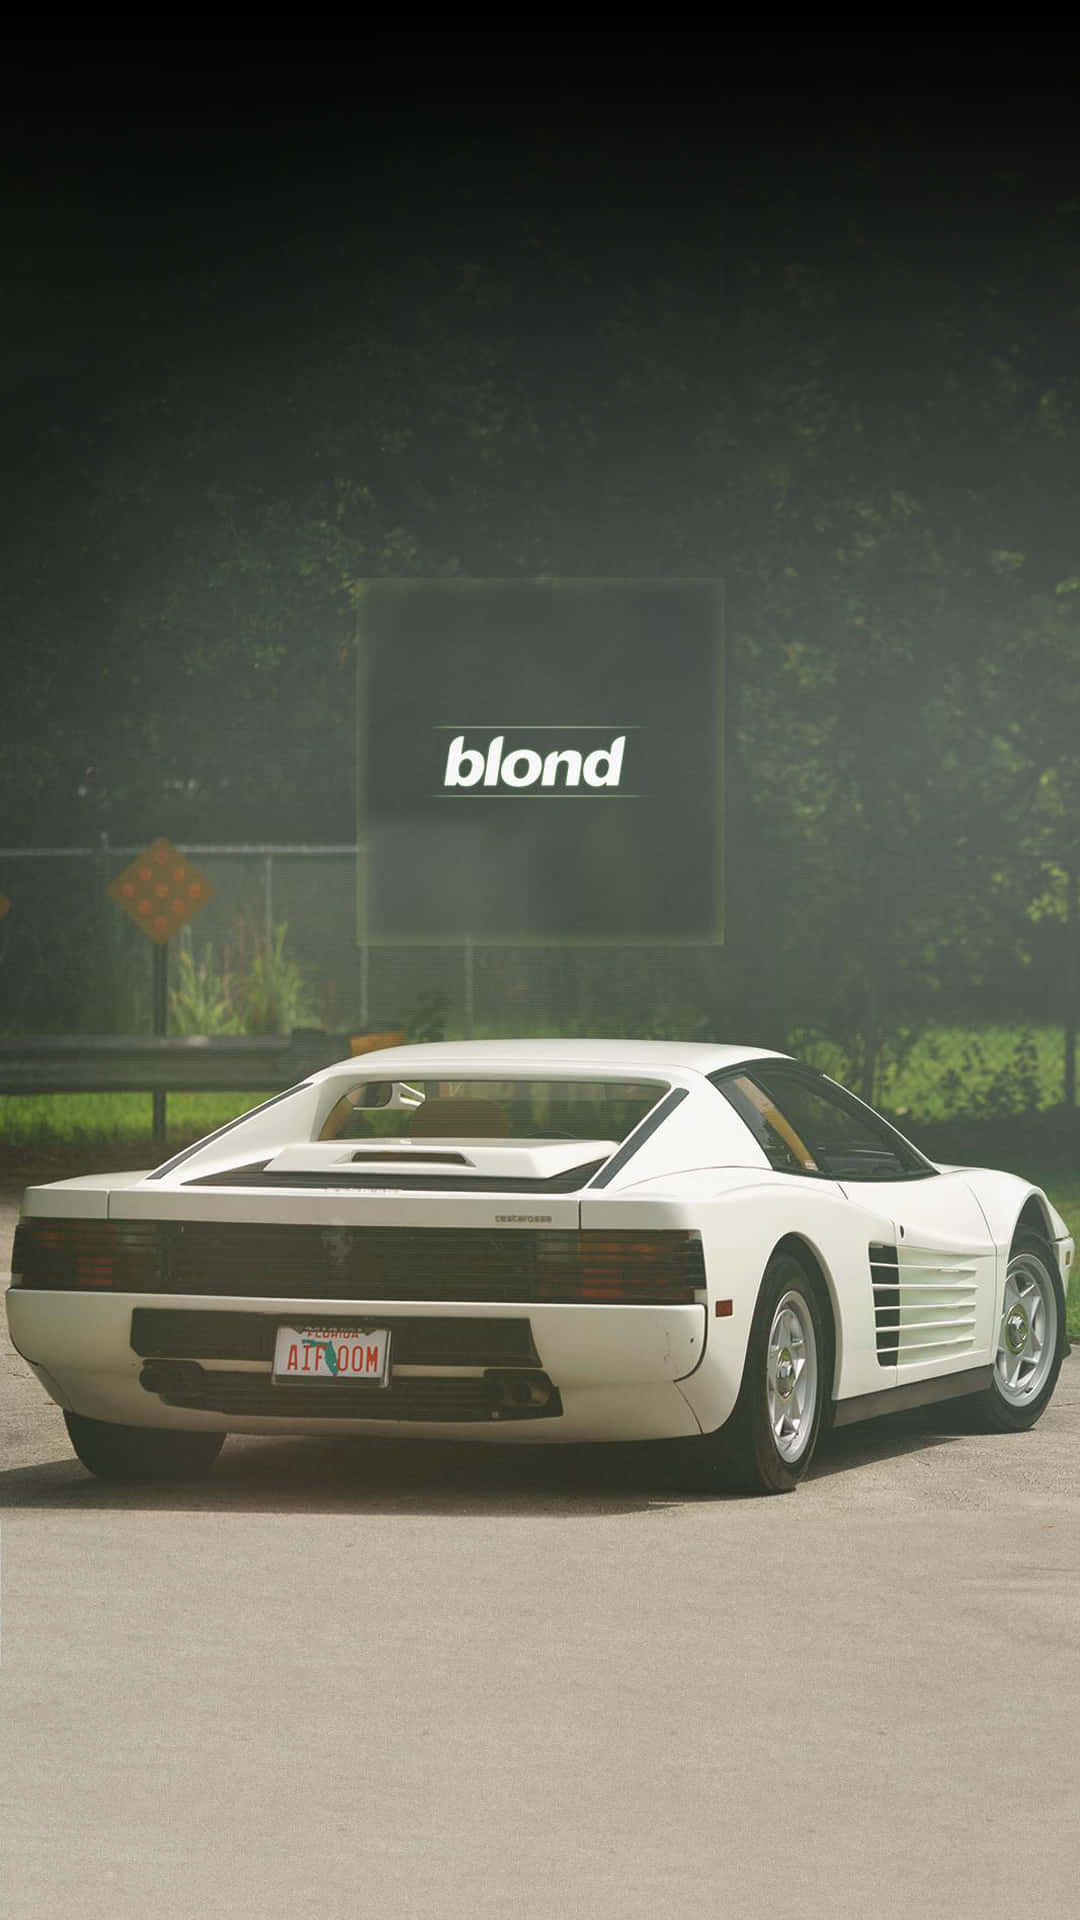 "Rev Up Your Style with a White Ferrari iPhone" Wallpaper